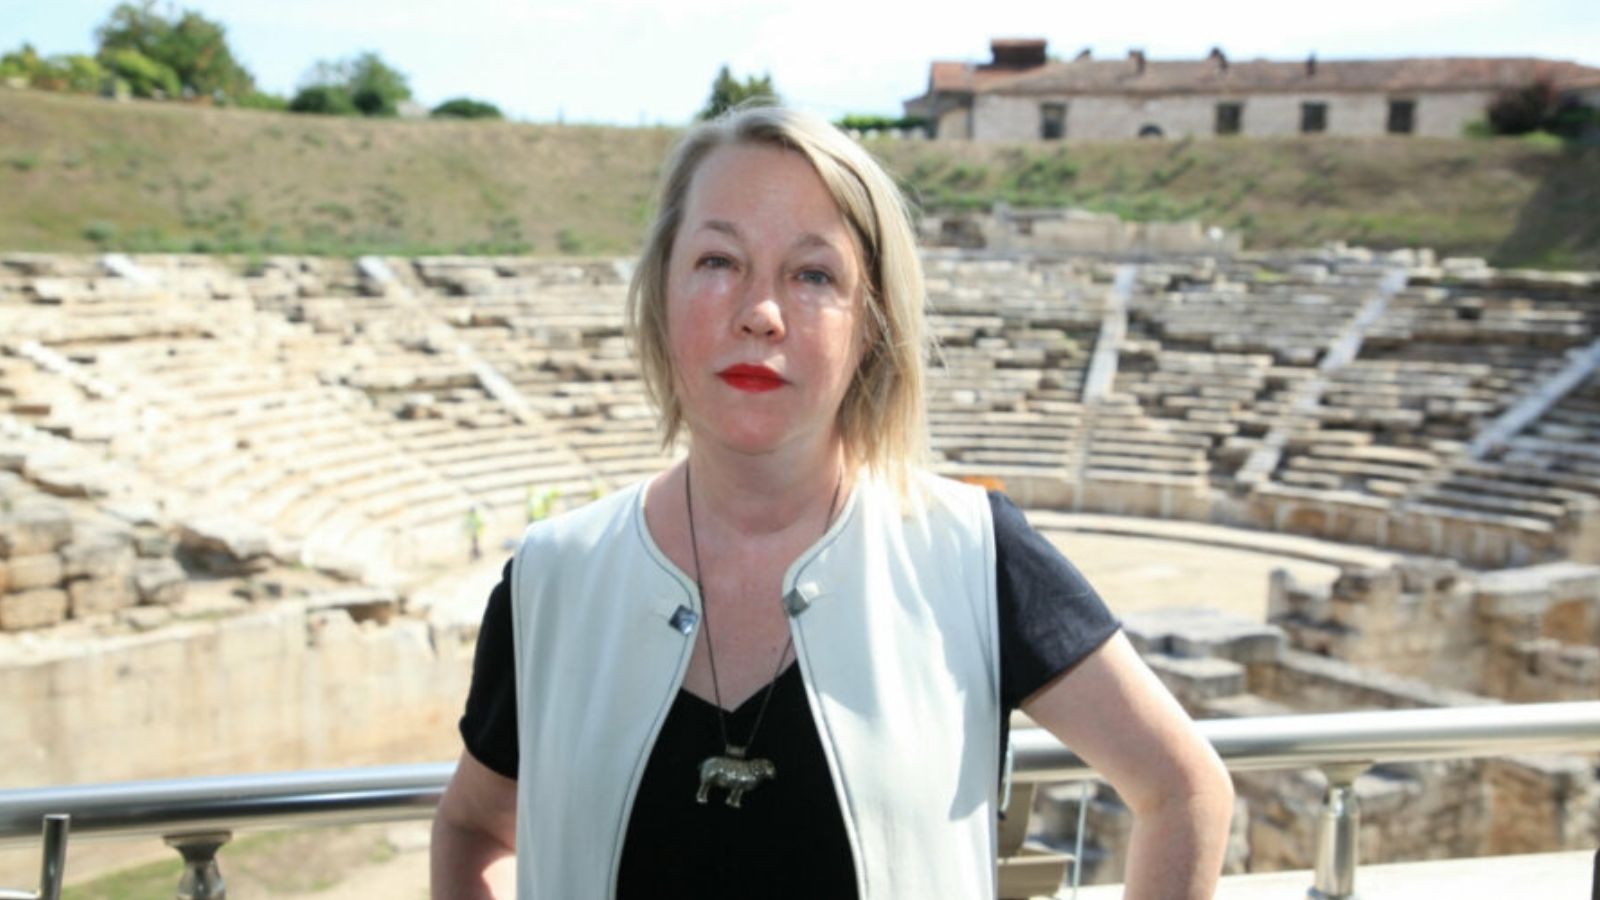 A.E. Stallings, a woman with short blonde hair, stands in front of a greek ampitheatre